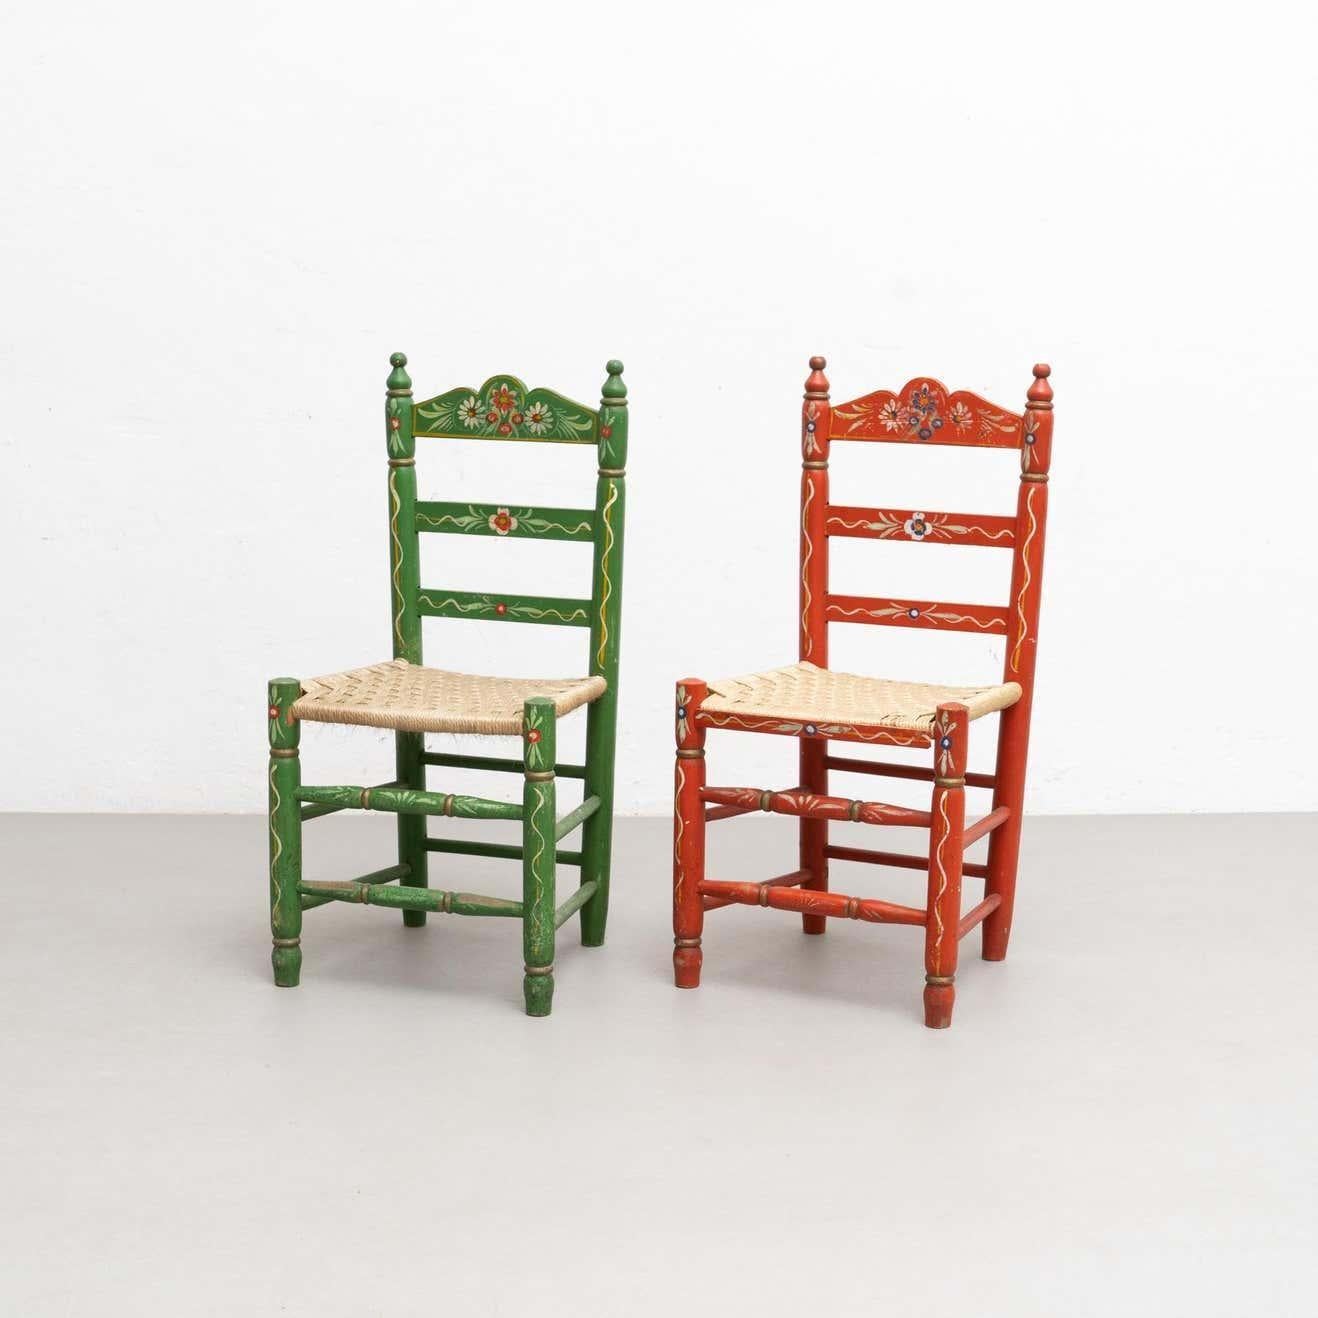 Mid-20th Century Set of Two Rustic Traditional Hand Painted Wood Chairs, circa 1940 For Sale